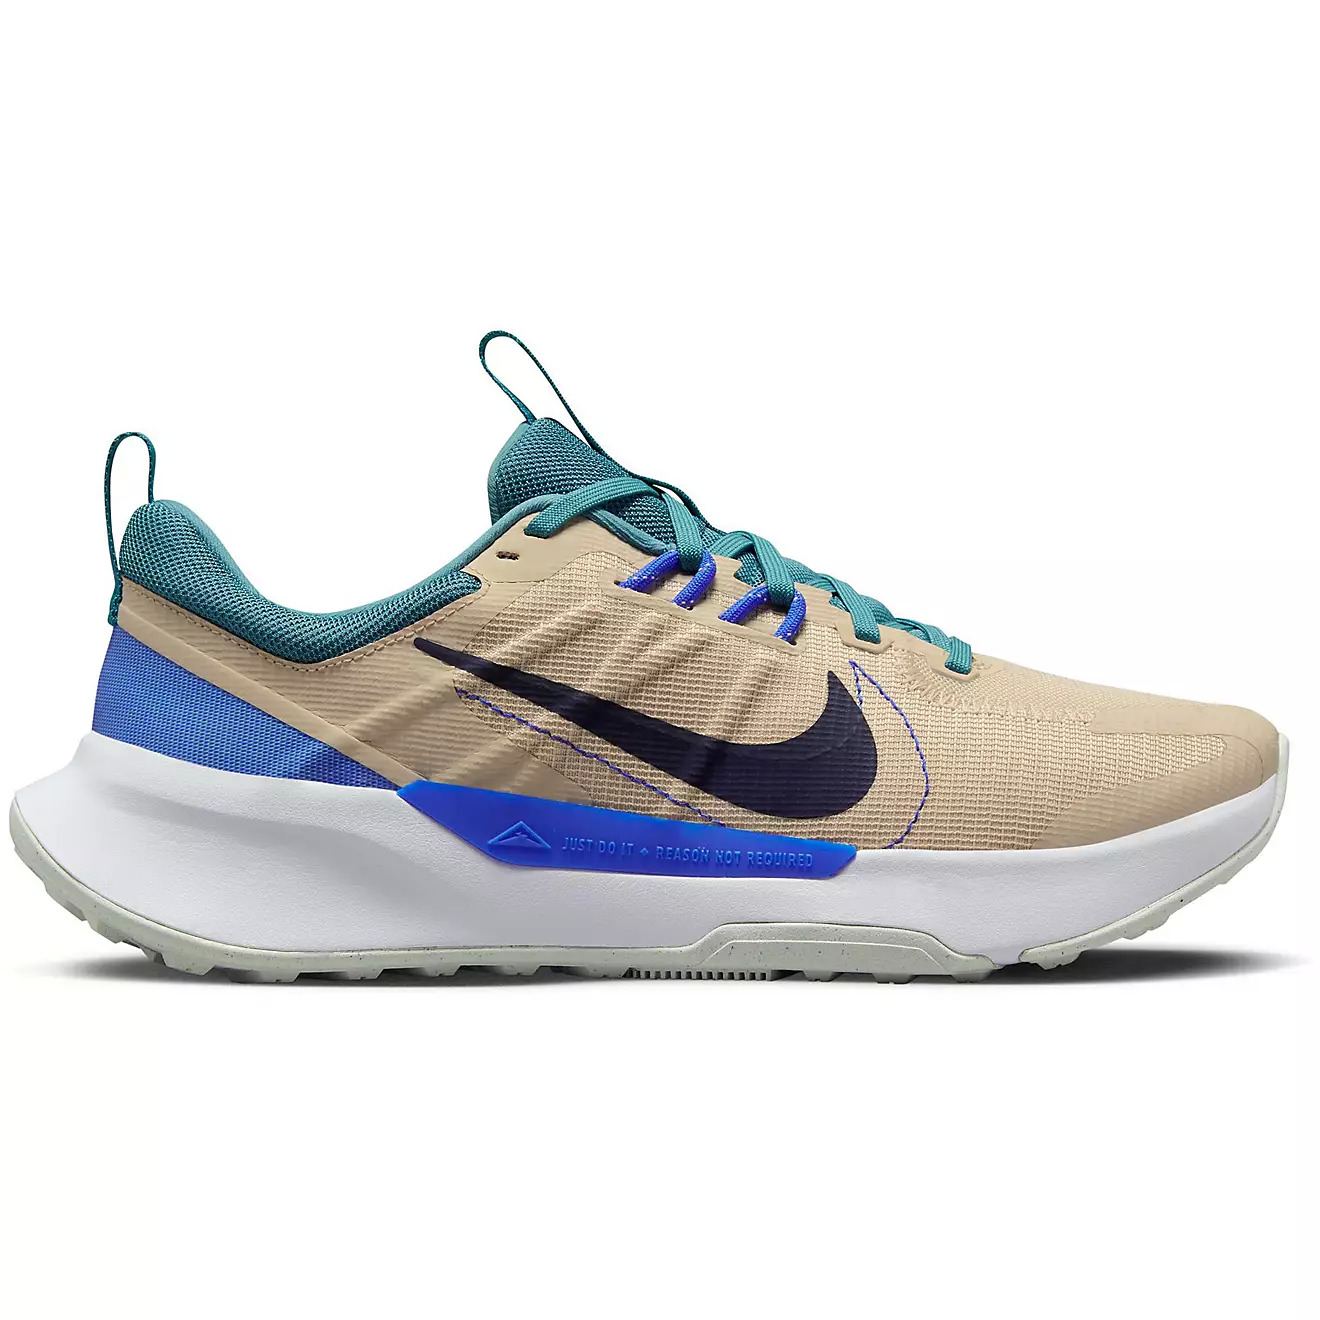 Nike Men's Juniper Trail 2 Running Shoes for 49.97$ at Academy Sports + Outdoors $49.97